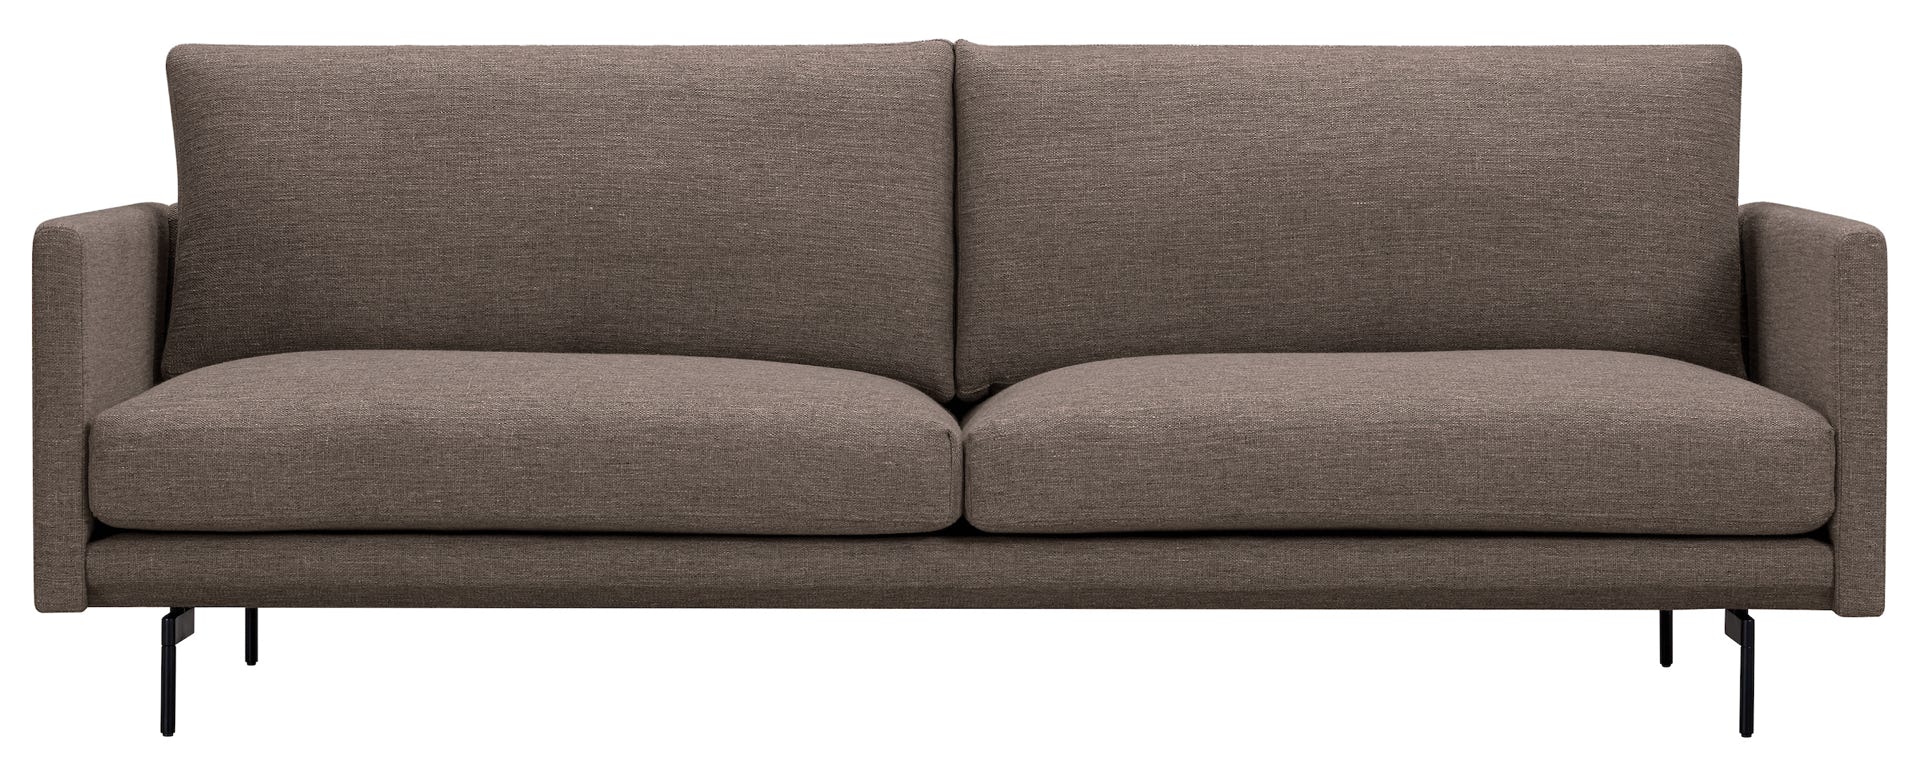 3 seater sofa - upholstery Julie 08 fabric (price group 4)